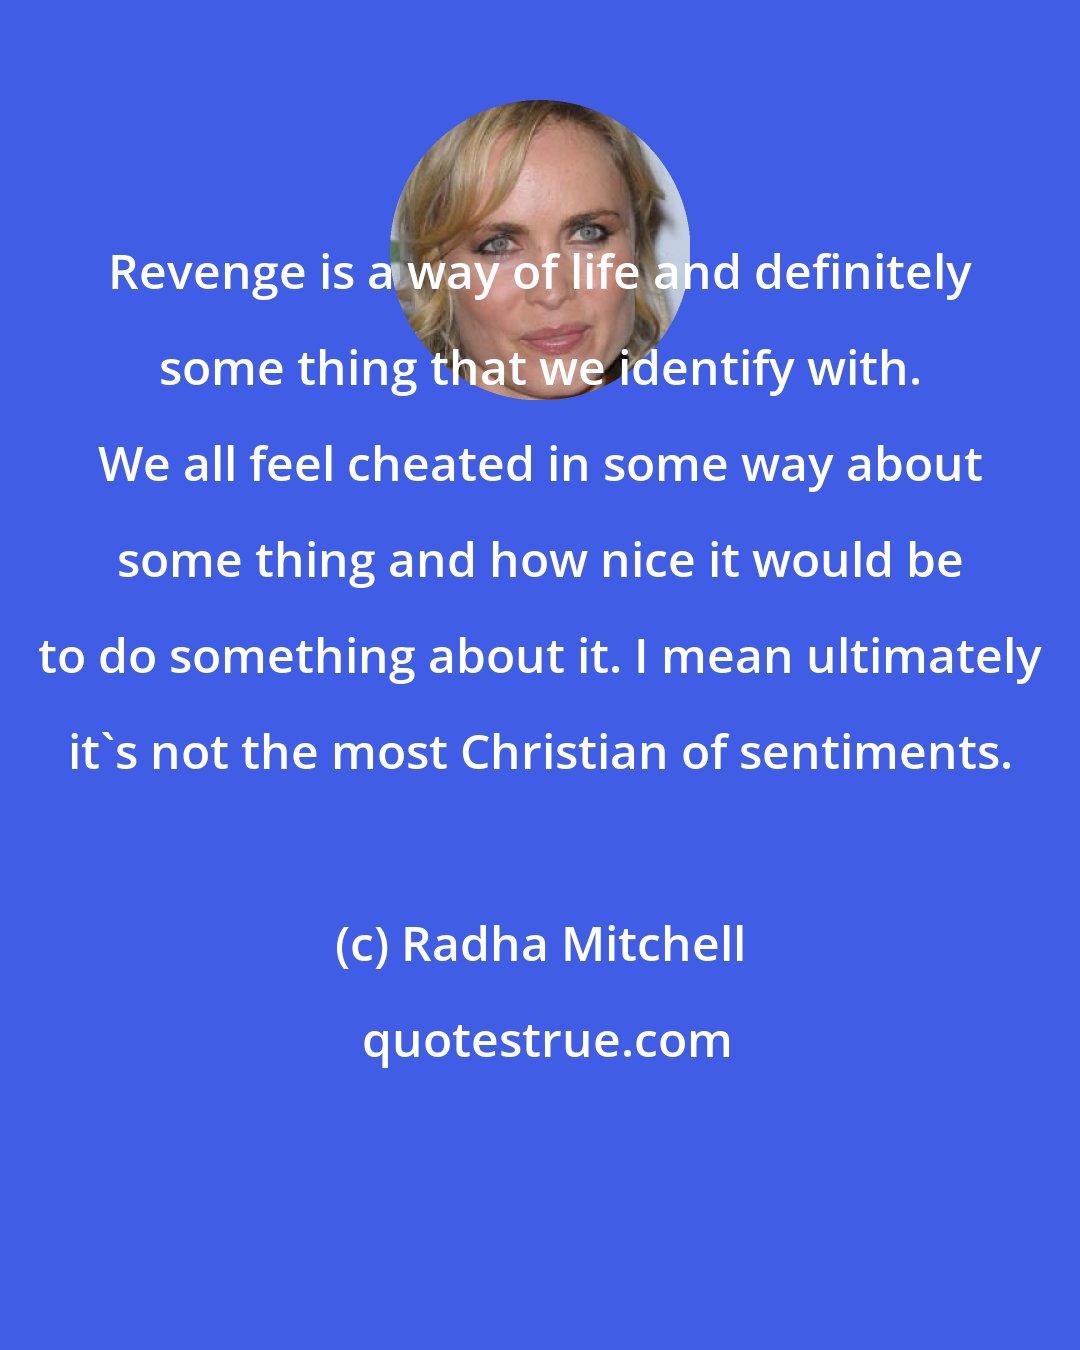 Radha Mitchell: Revenge is a way of life and definitely some thing that we identify with. We all feel cheated in some way about some thing and how nice it would be to do something about it. I mean ultimately it's not the most Christian of sentiments.